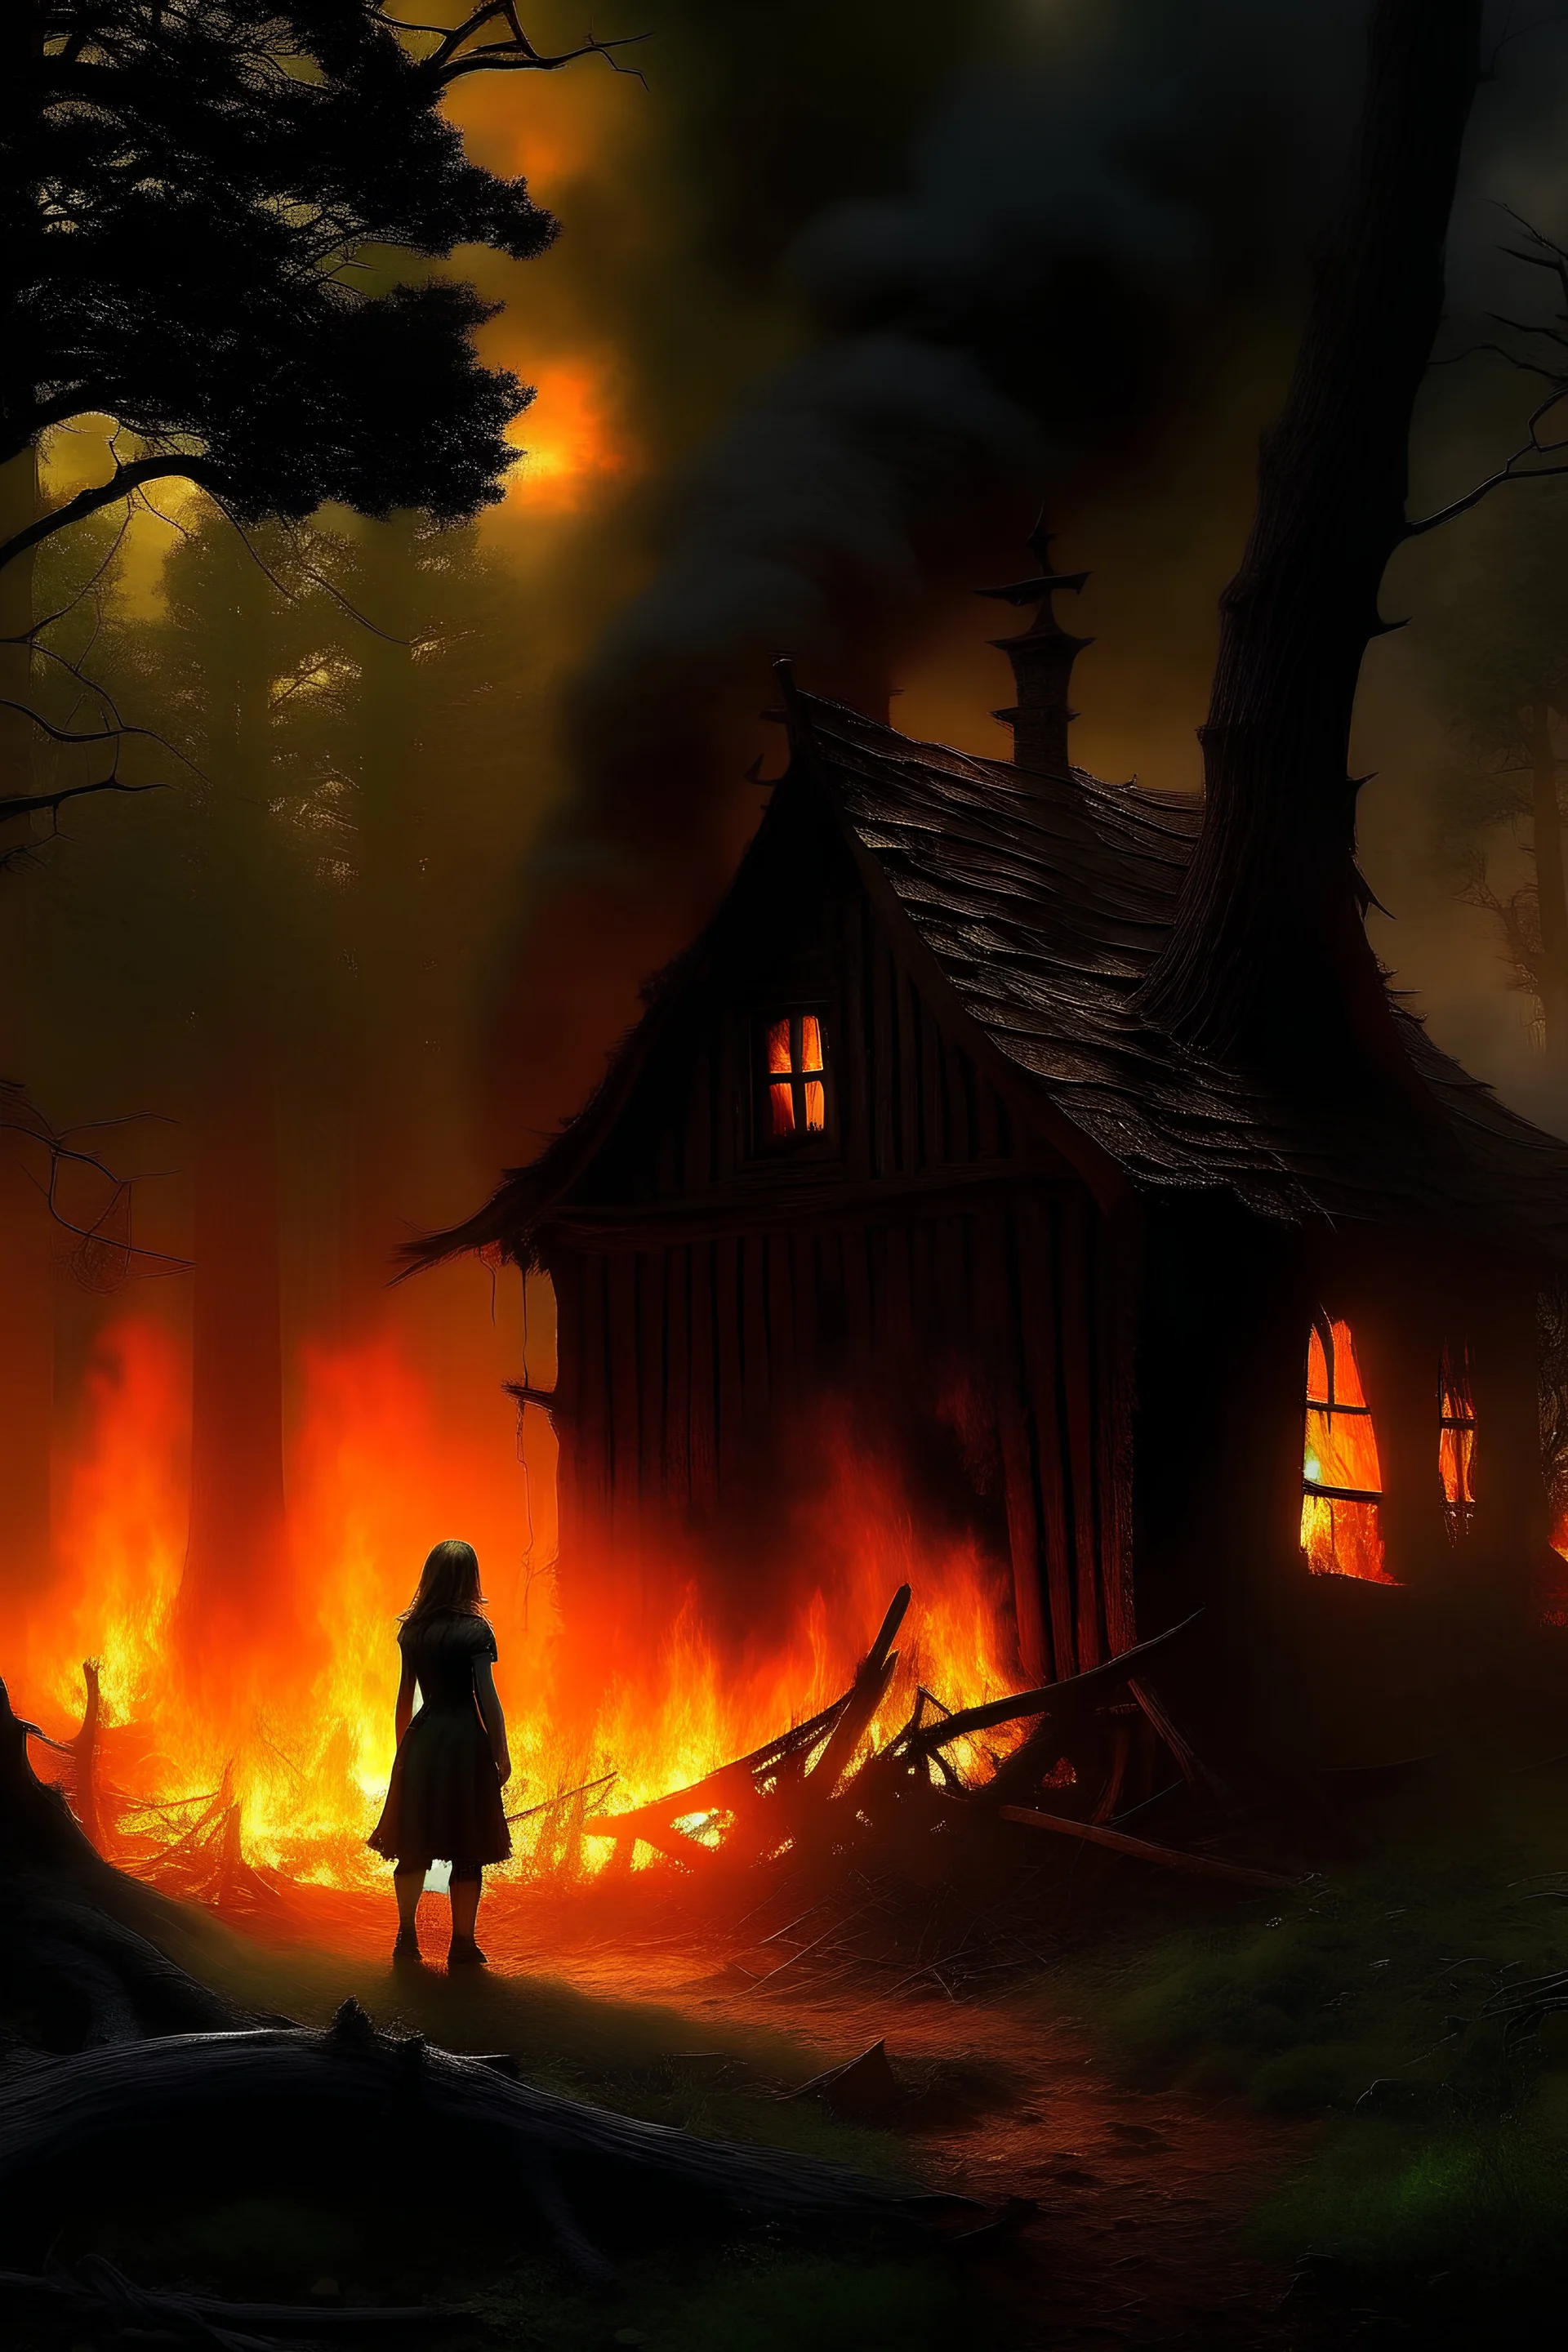 In the heart of a dense, ancient forest, a medieval cottage stands engulfed in flames, its timeworn timbers crackling and sending plumes of smoke into the sky. In the foreground, a mysterious woman in silhouette stands, her figure outlined by the fiery inferno behind her. Write a scene that unveils the secrets hidden within this blazing spectacle and explore the emotions coursing through the woman as she watches her home succumb to the relentless fire.